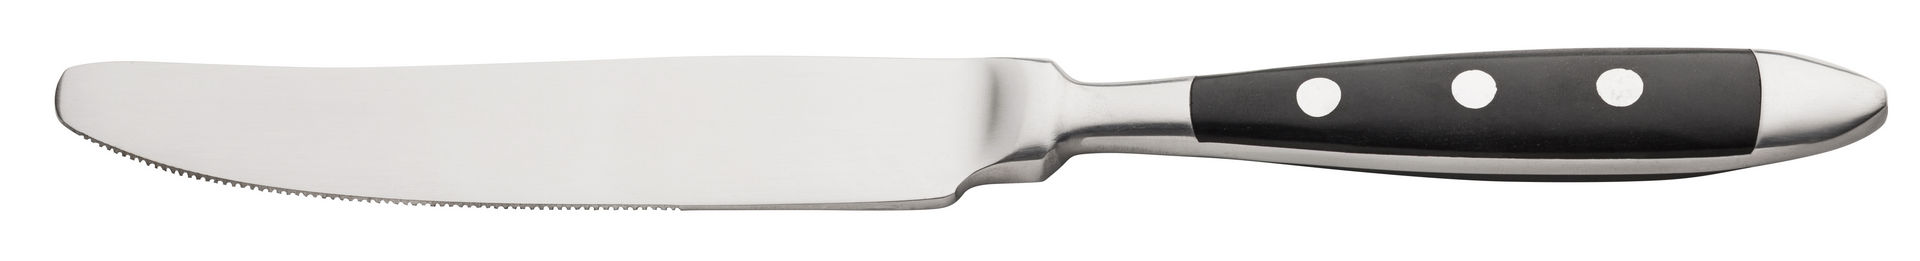 Doria Table Knife - F00120-000000-B01012 (Pack of 12)